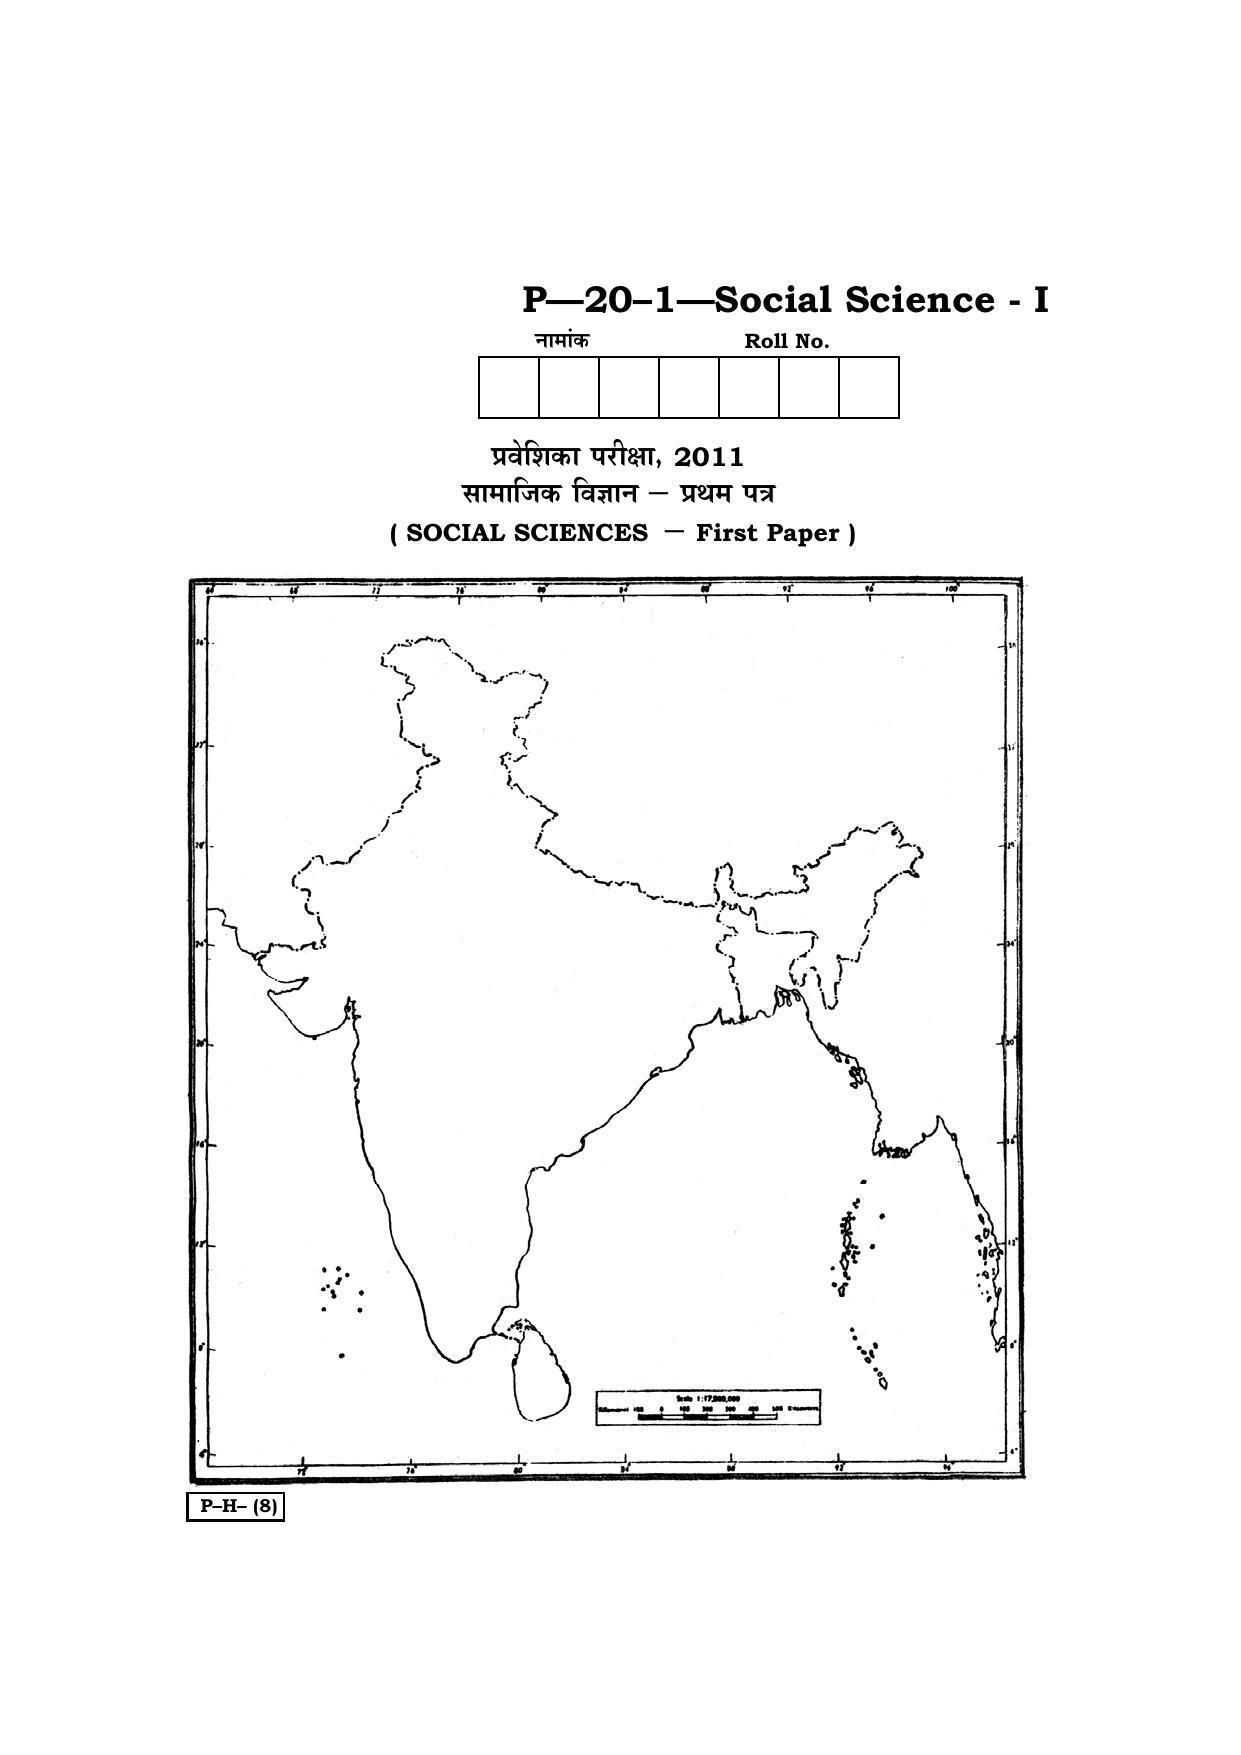 RBSE 2011 Social Science I Praveshika Question Paper - Page 9